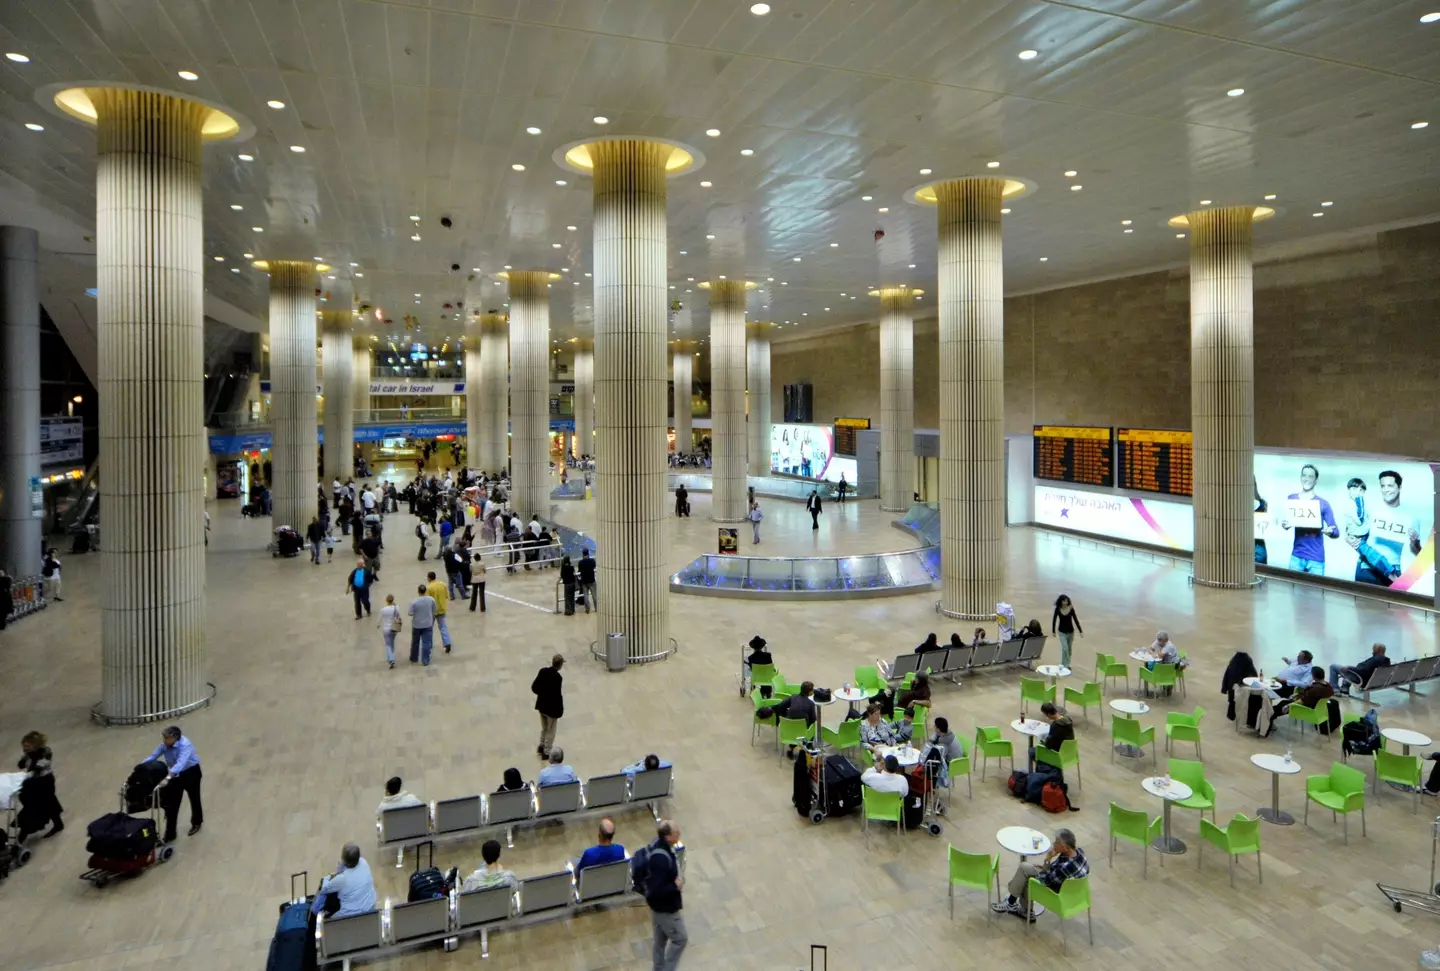 The scene went down at Ben Gurion Airport.